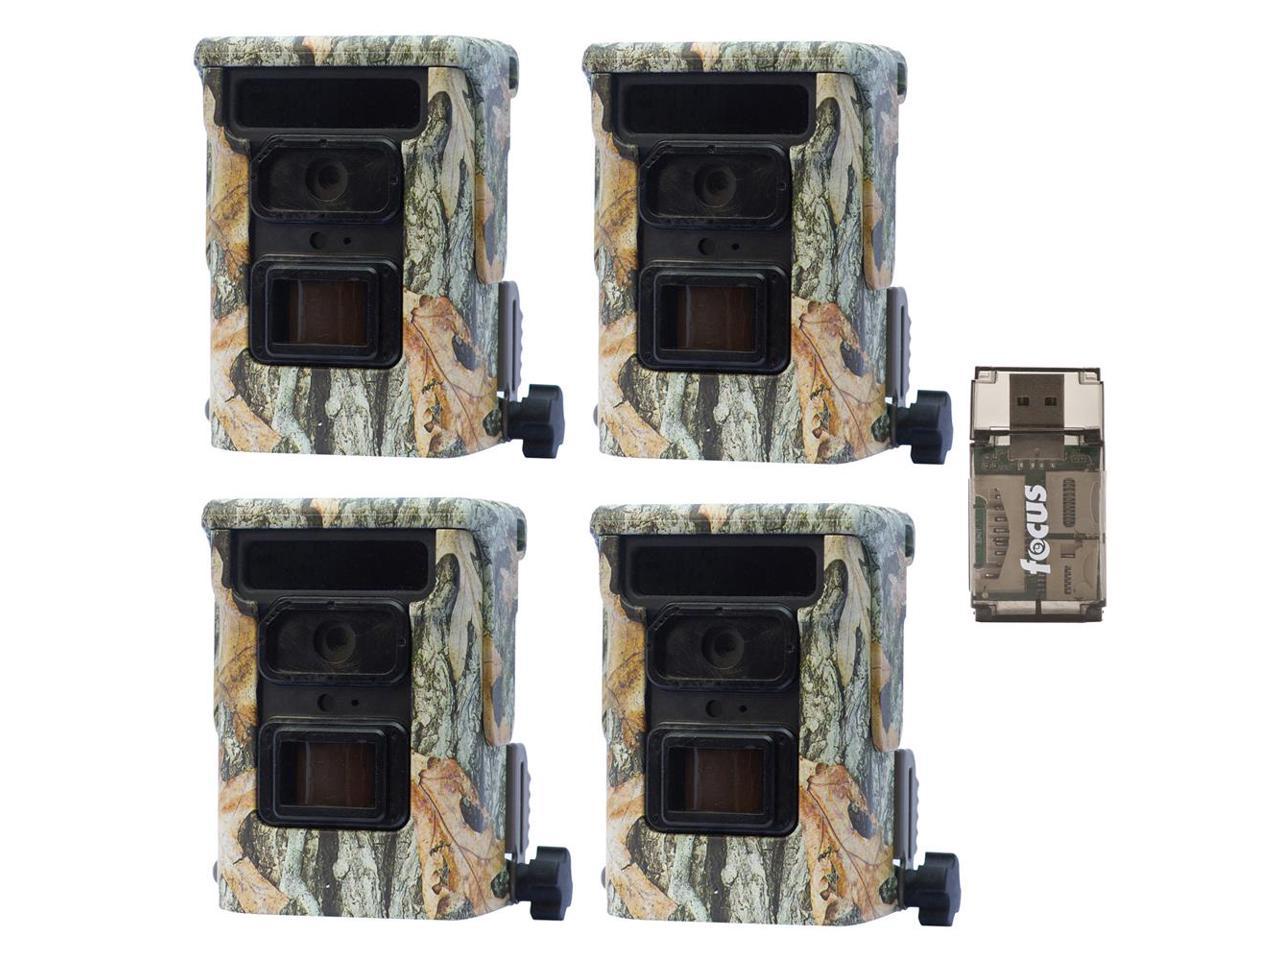 Browning Defender 940 20MP Trail Game Camera (Camo, 4) and Focus Reader